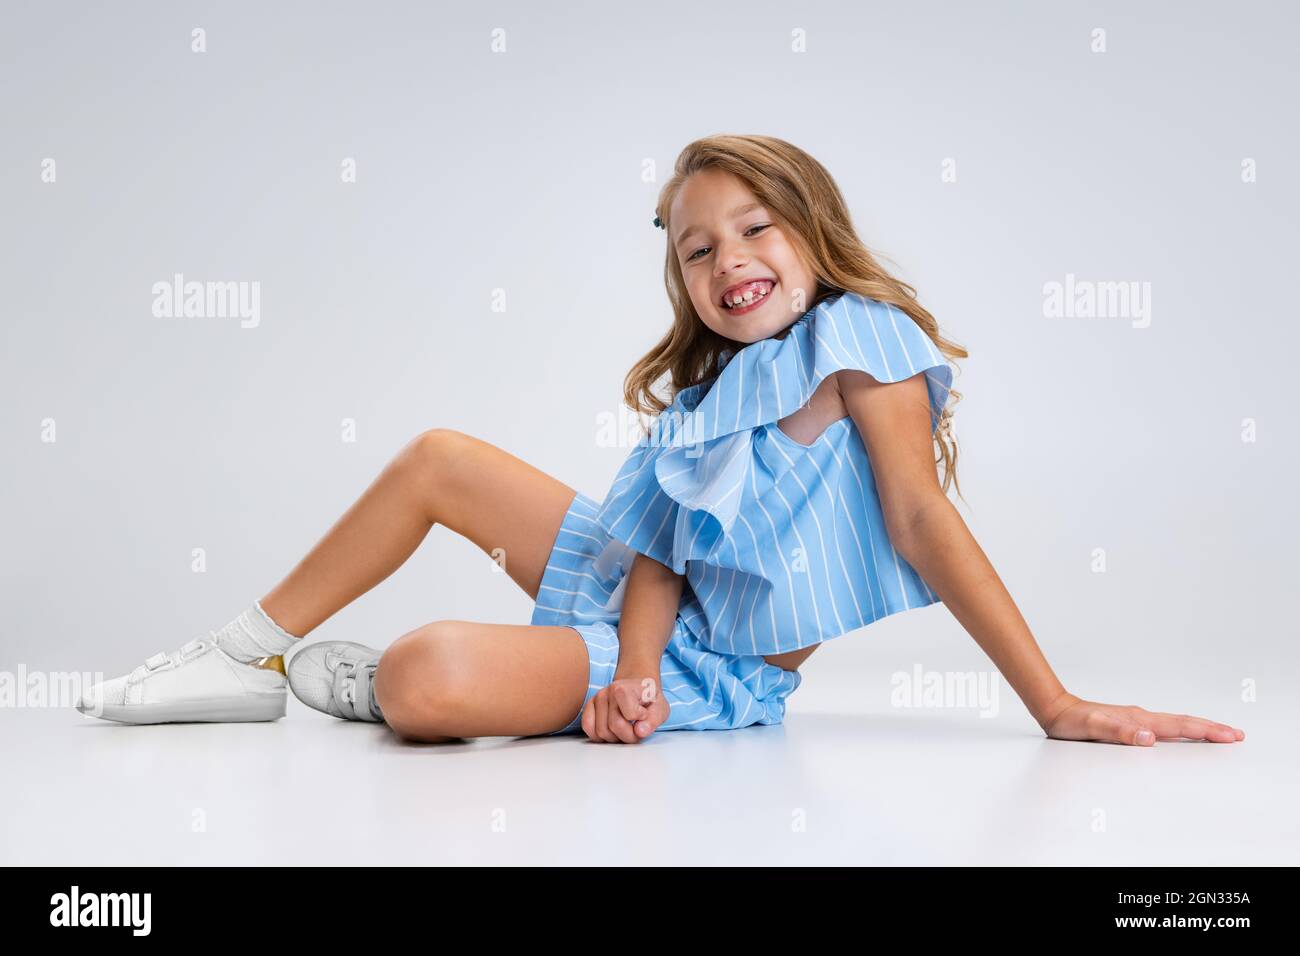 Beautiful little girl in blue holiday outfit sitting on floor ...